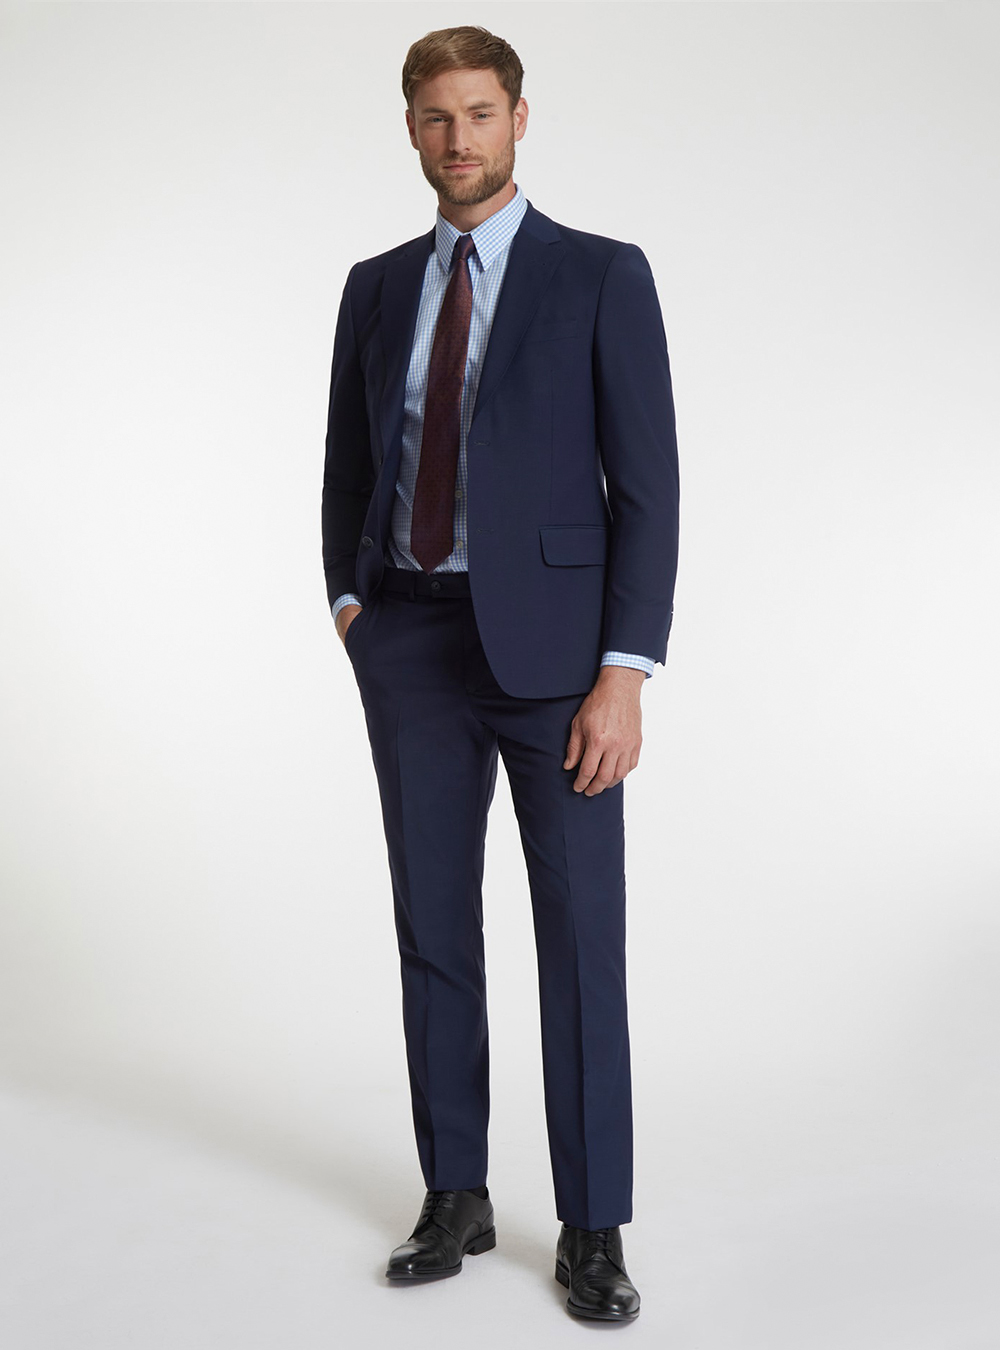 navy suit, blue patterned shirt, and black derby shoes